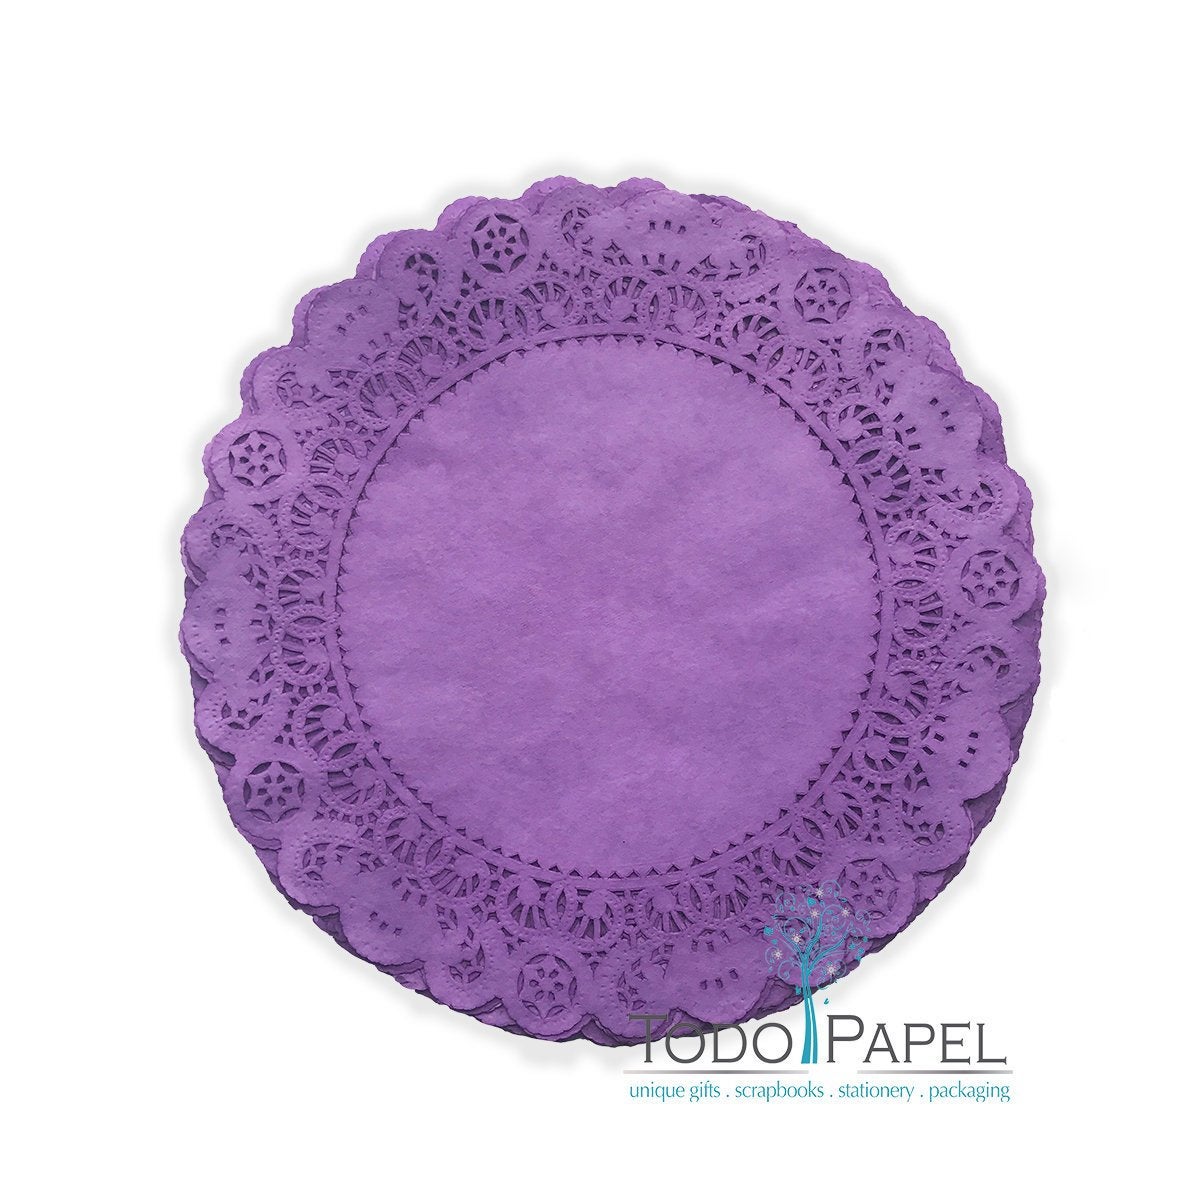 50 Pack 12 Inch Normandy Style Vibrant Purple Paper Lace Doilies - Great As Table Décor Plate Chargers, Placemats, And Centerpieces For Wedding